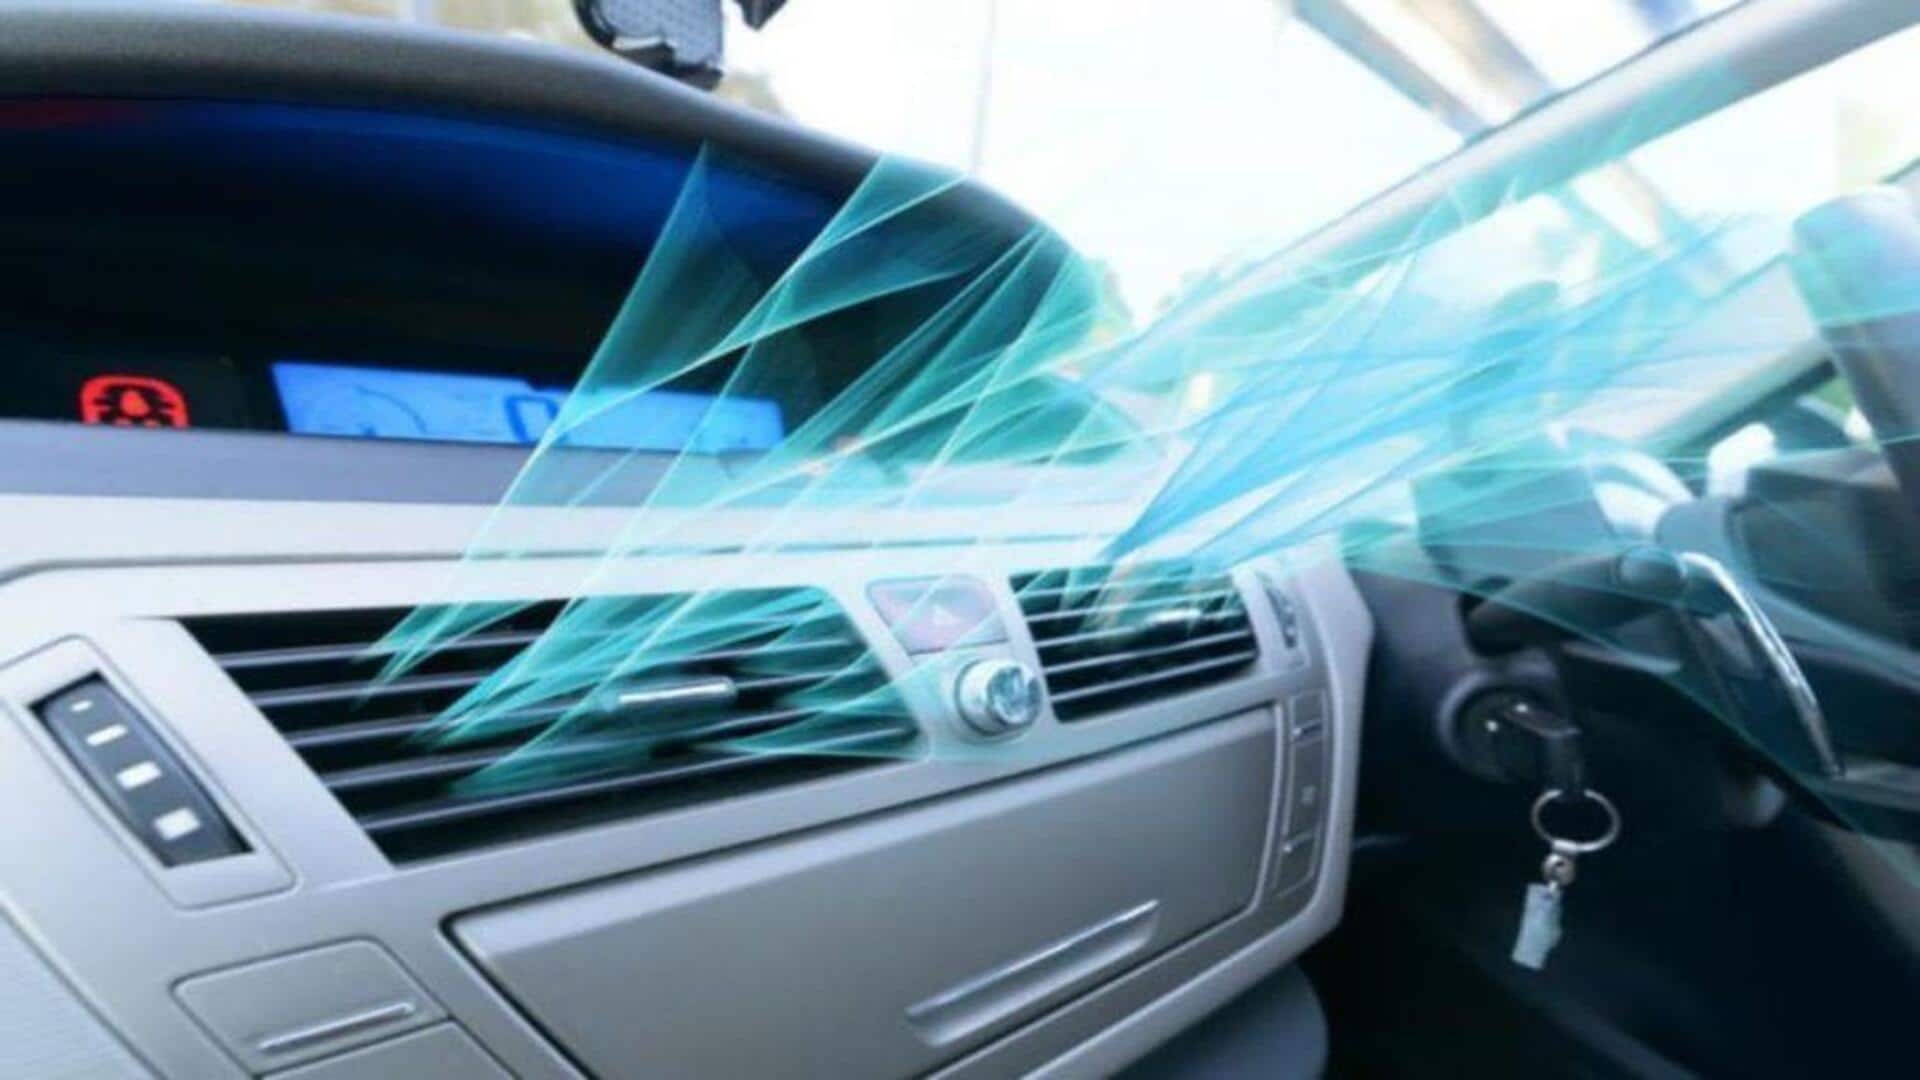 Steps to keep your car cool amid soaring summer temperatures